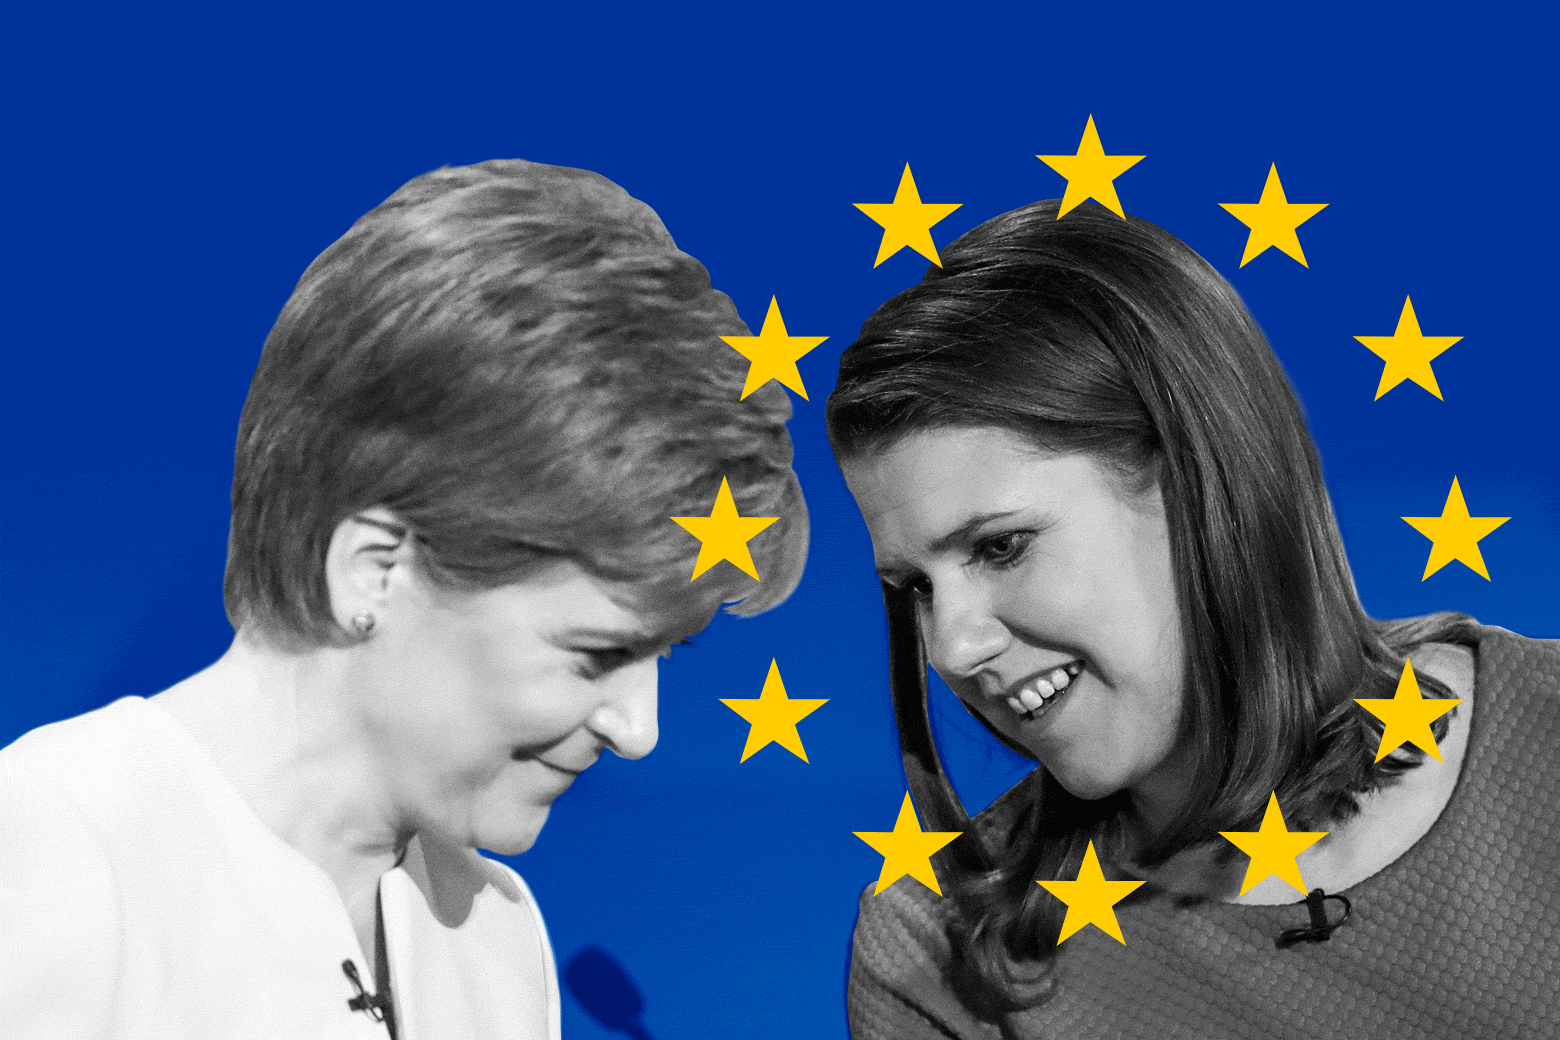 Jo Swinson smiles as she leans over to speak to Nicola Sturgeon during a televised debate. 